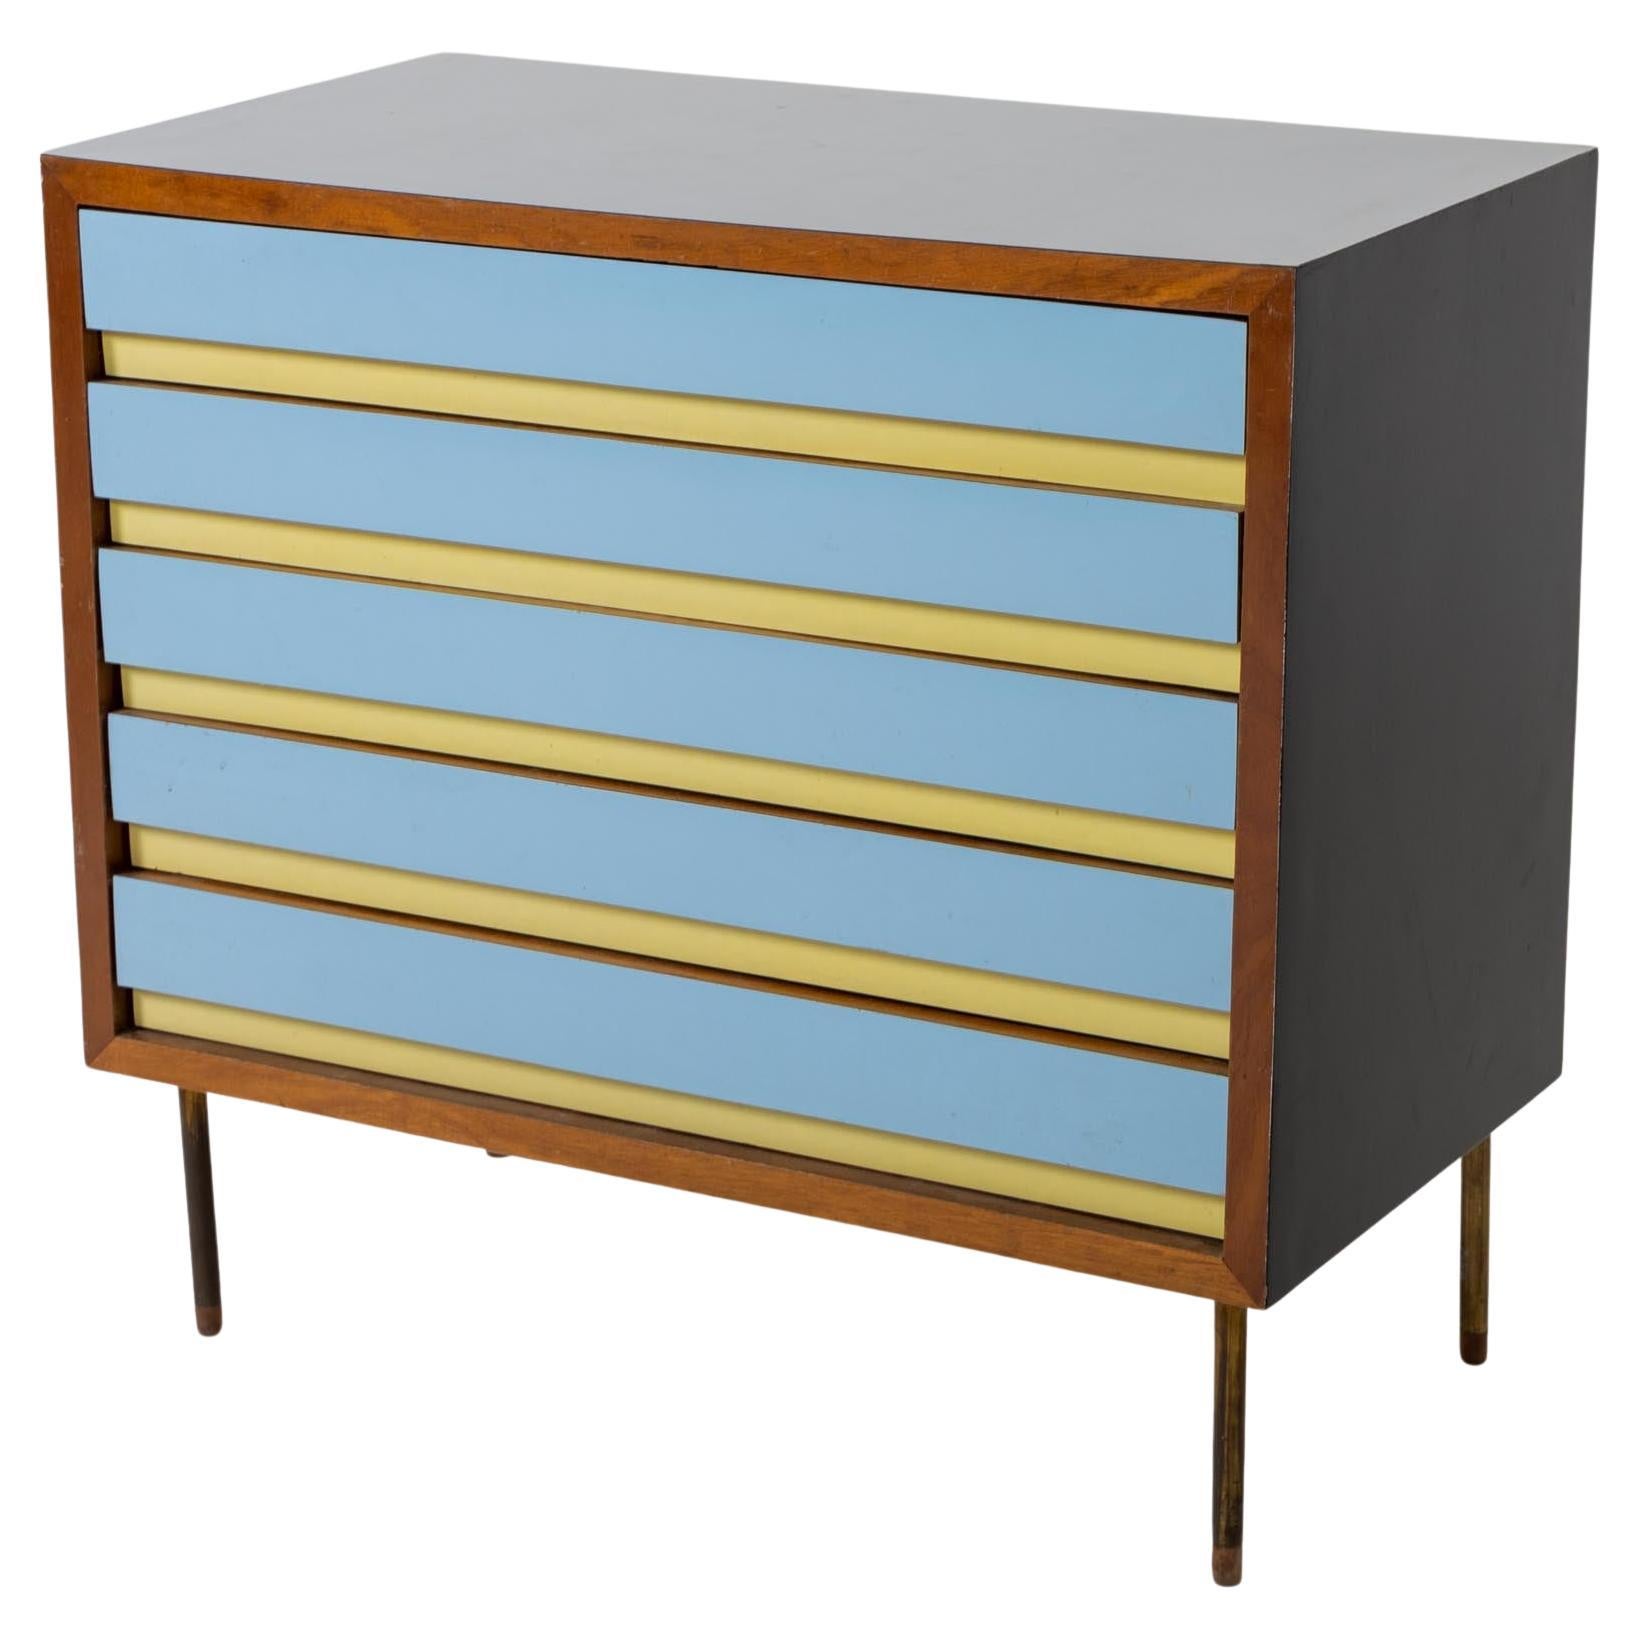 Small Chest of Drawers, Mid-20th Century